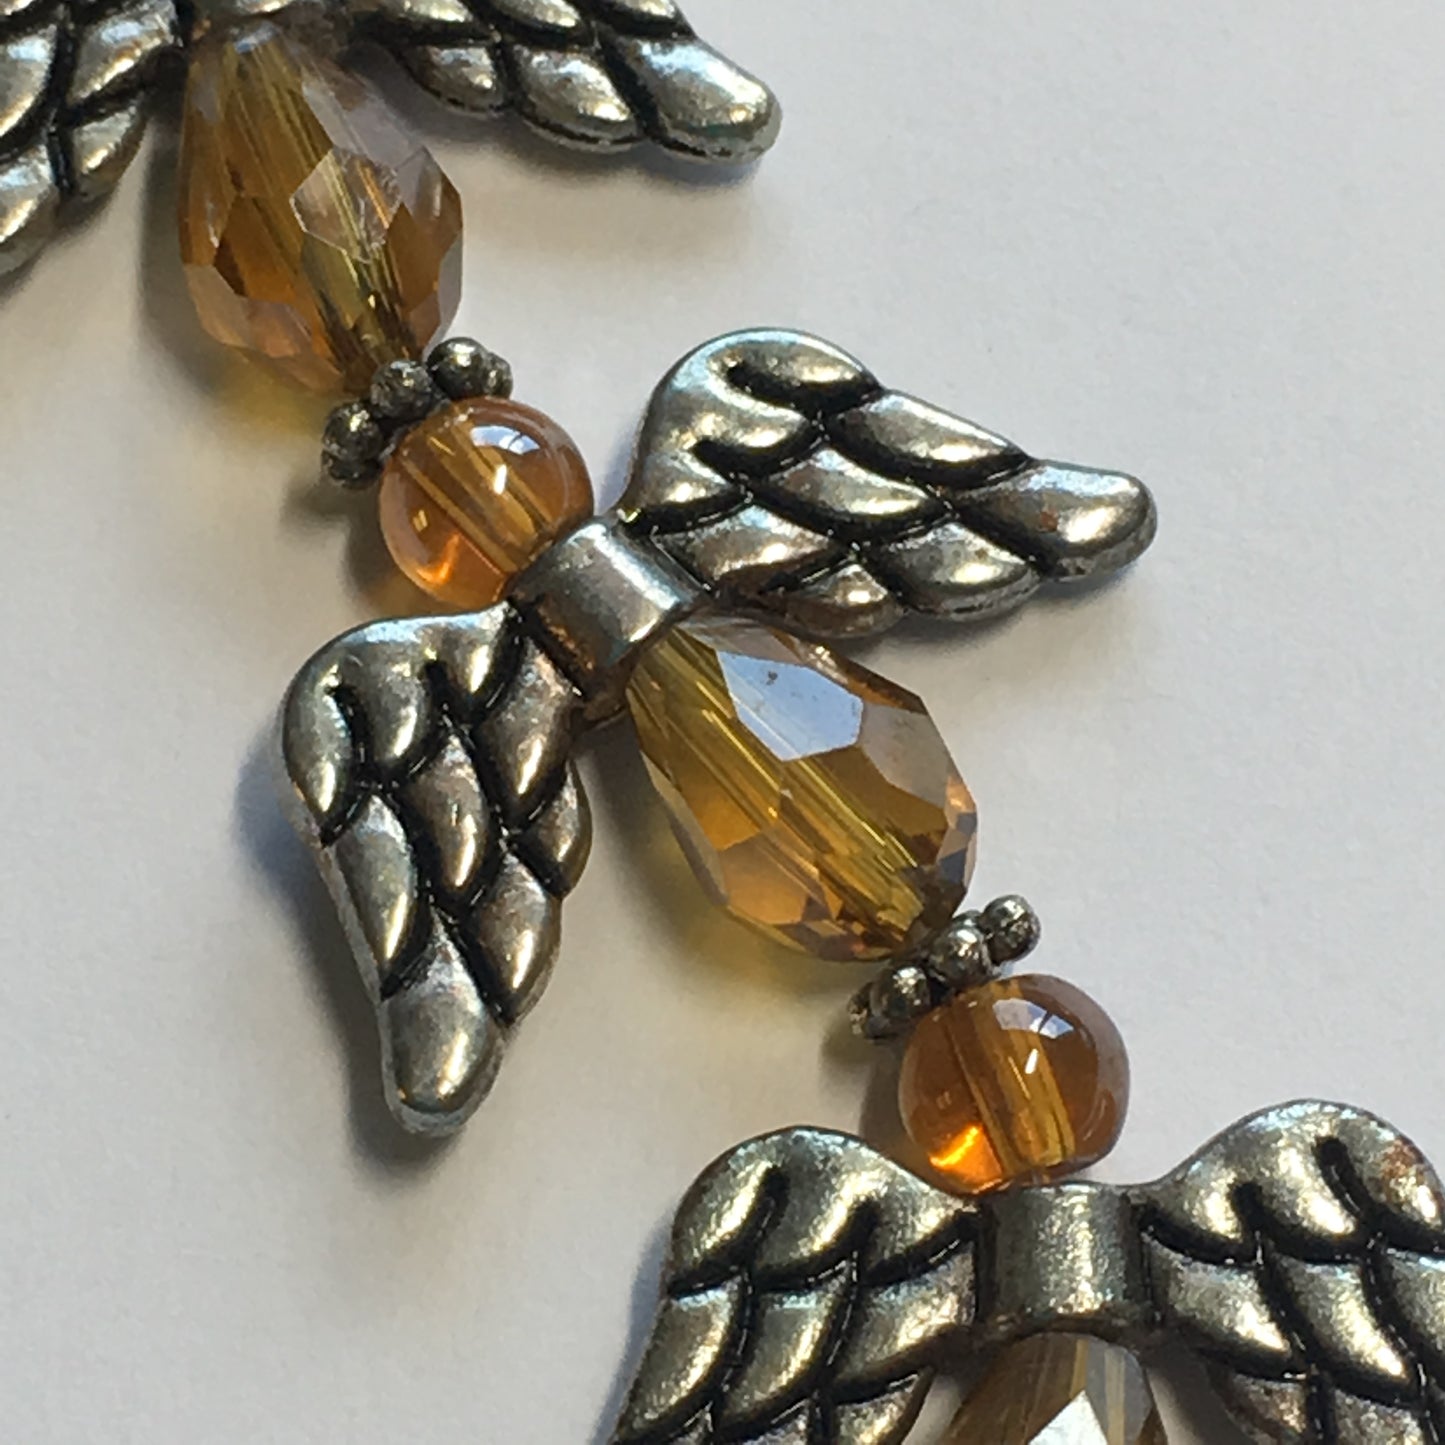 Bead Gallery Amber Brown Glass Faceted Drop Beads with Antique Silver Wings Beads, 7 of Each Bead